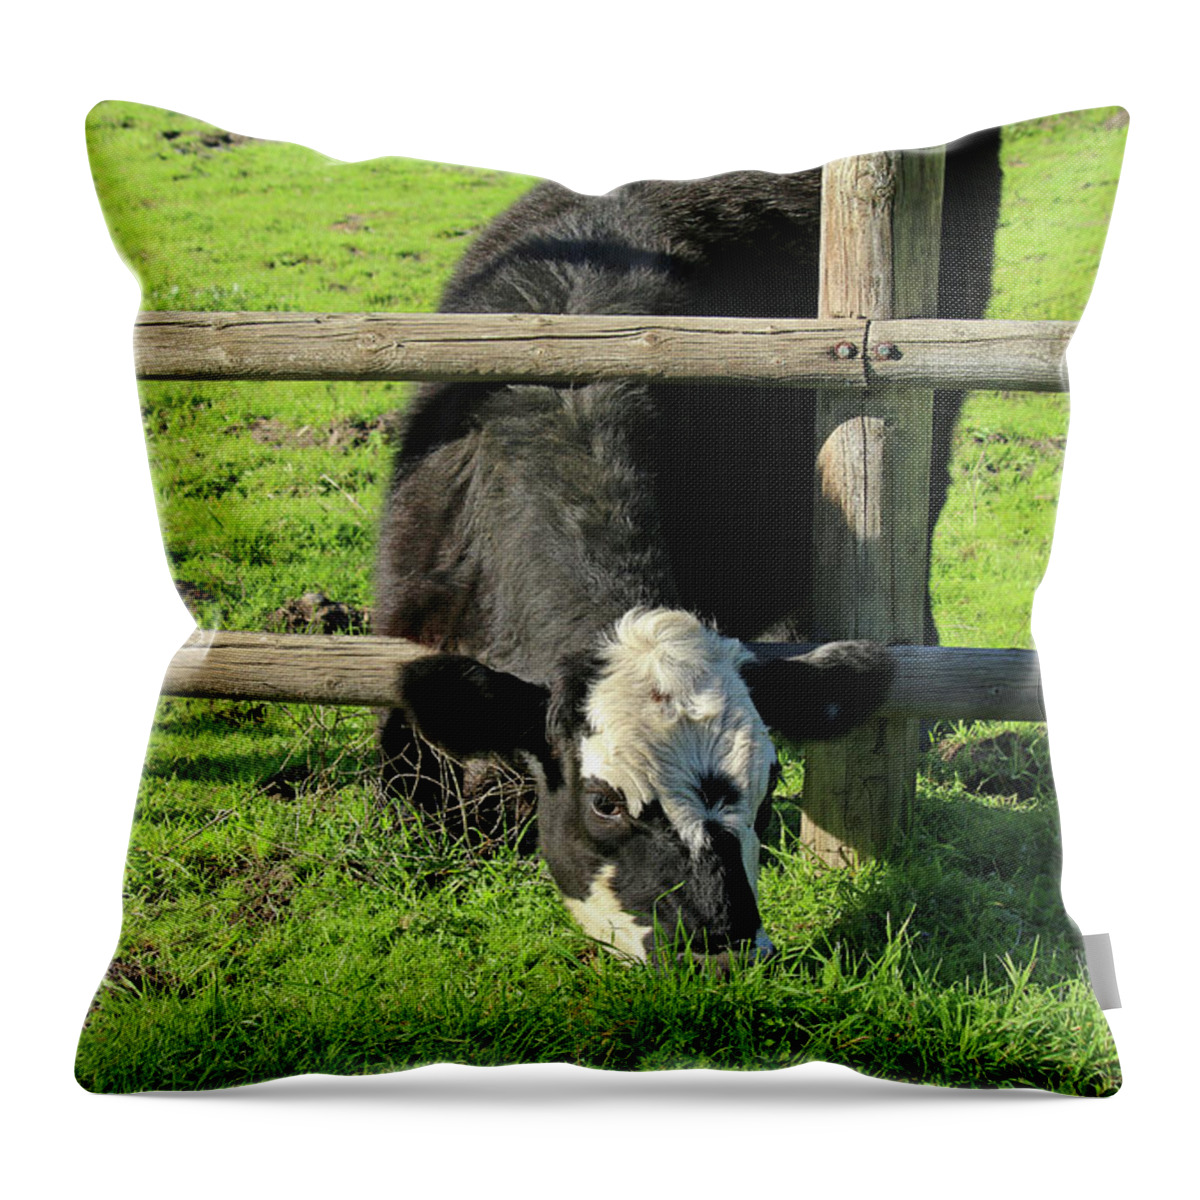 San Luis Obispo County Throw Pillow featuring the photograph The Grass is Always Greener by Art Block Collections